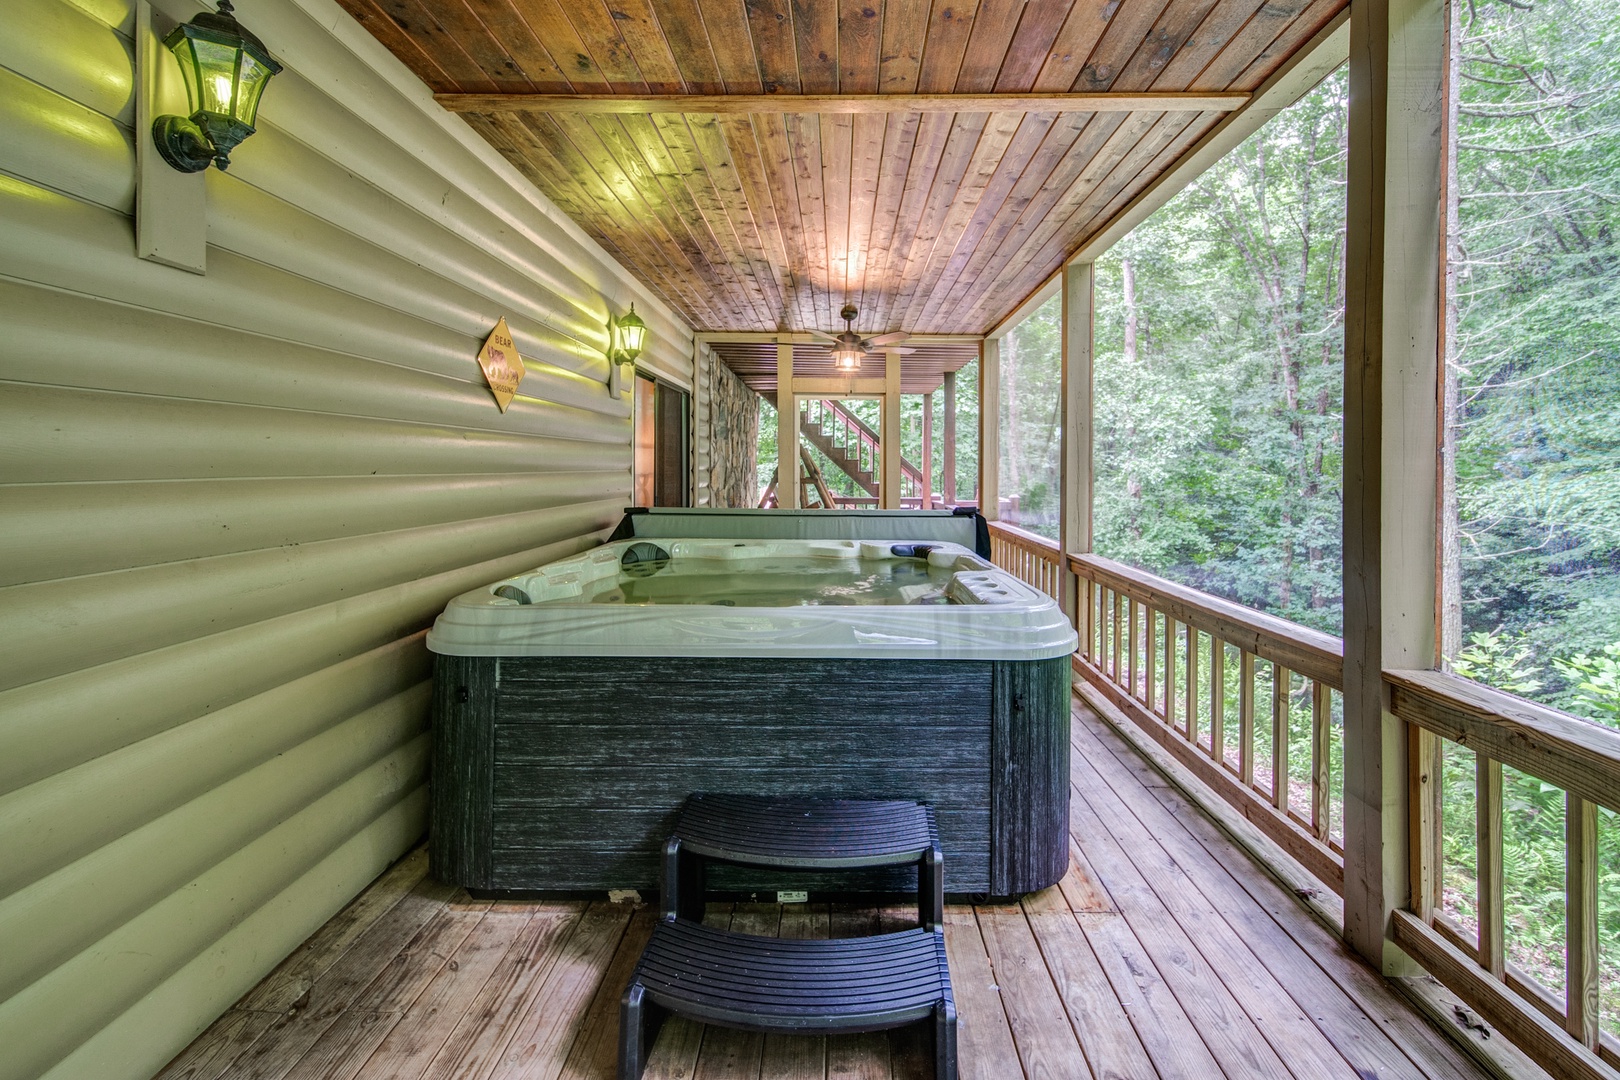 Relax and soak in the hot tub with views of the woods, creek, and waterfall